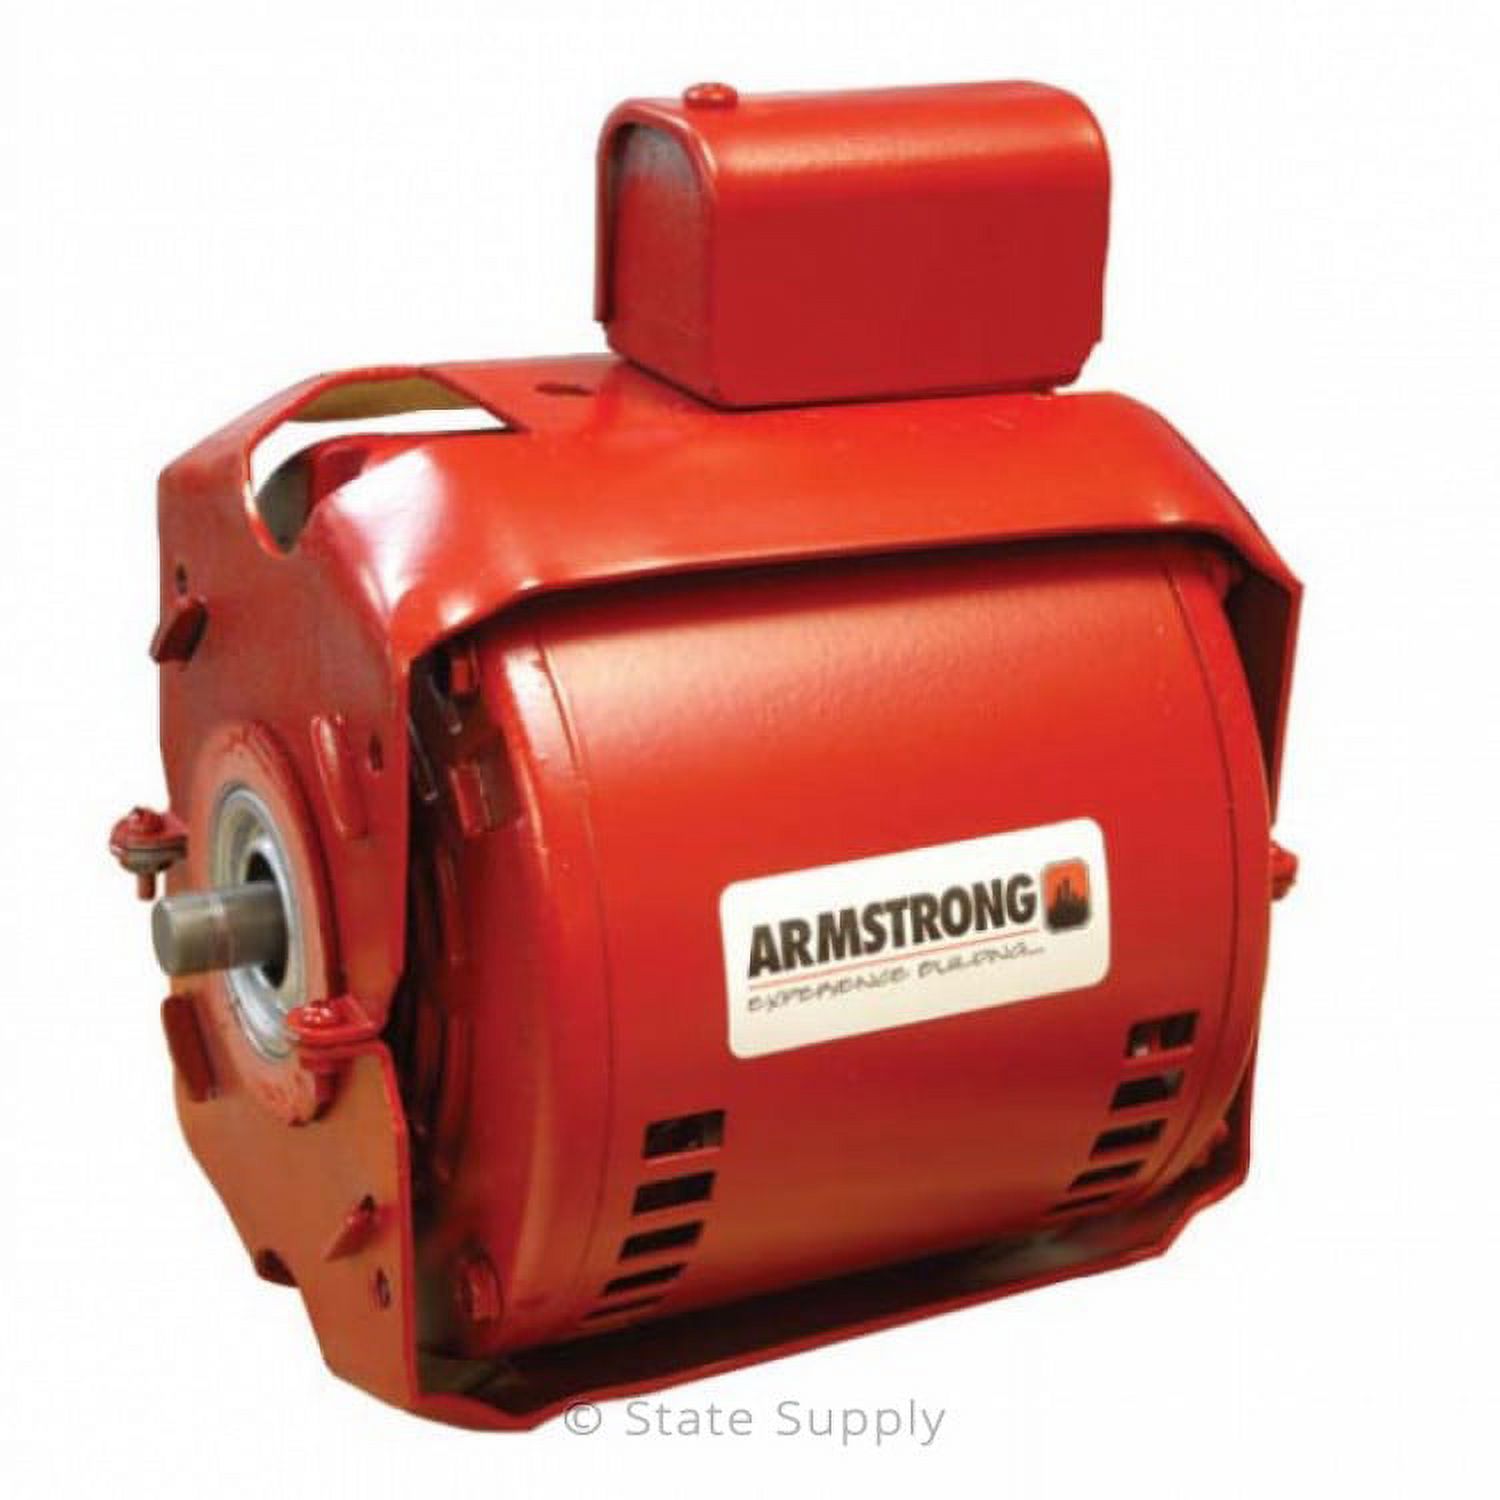 Armstrong 811757-002, Single Phase, 115/230 Volts, Resilient Mounted Motors Assembly-60 Cycle, 60 Hz High Temp. Standard, All Bronze Fitted, for use with 3/4 HP, Model S-57 - image 1 of 1